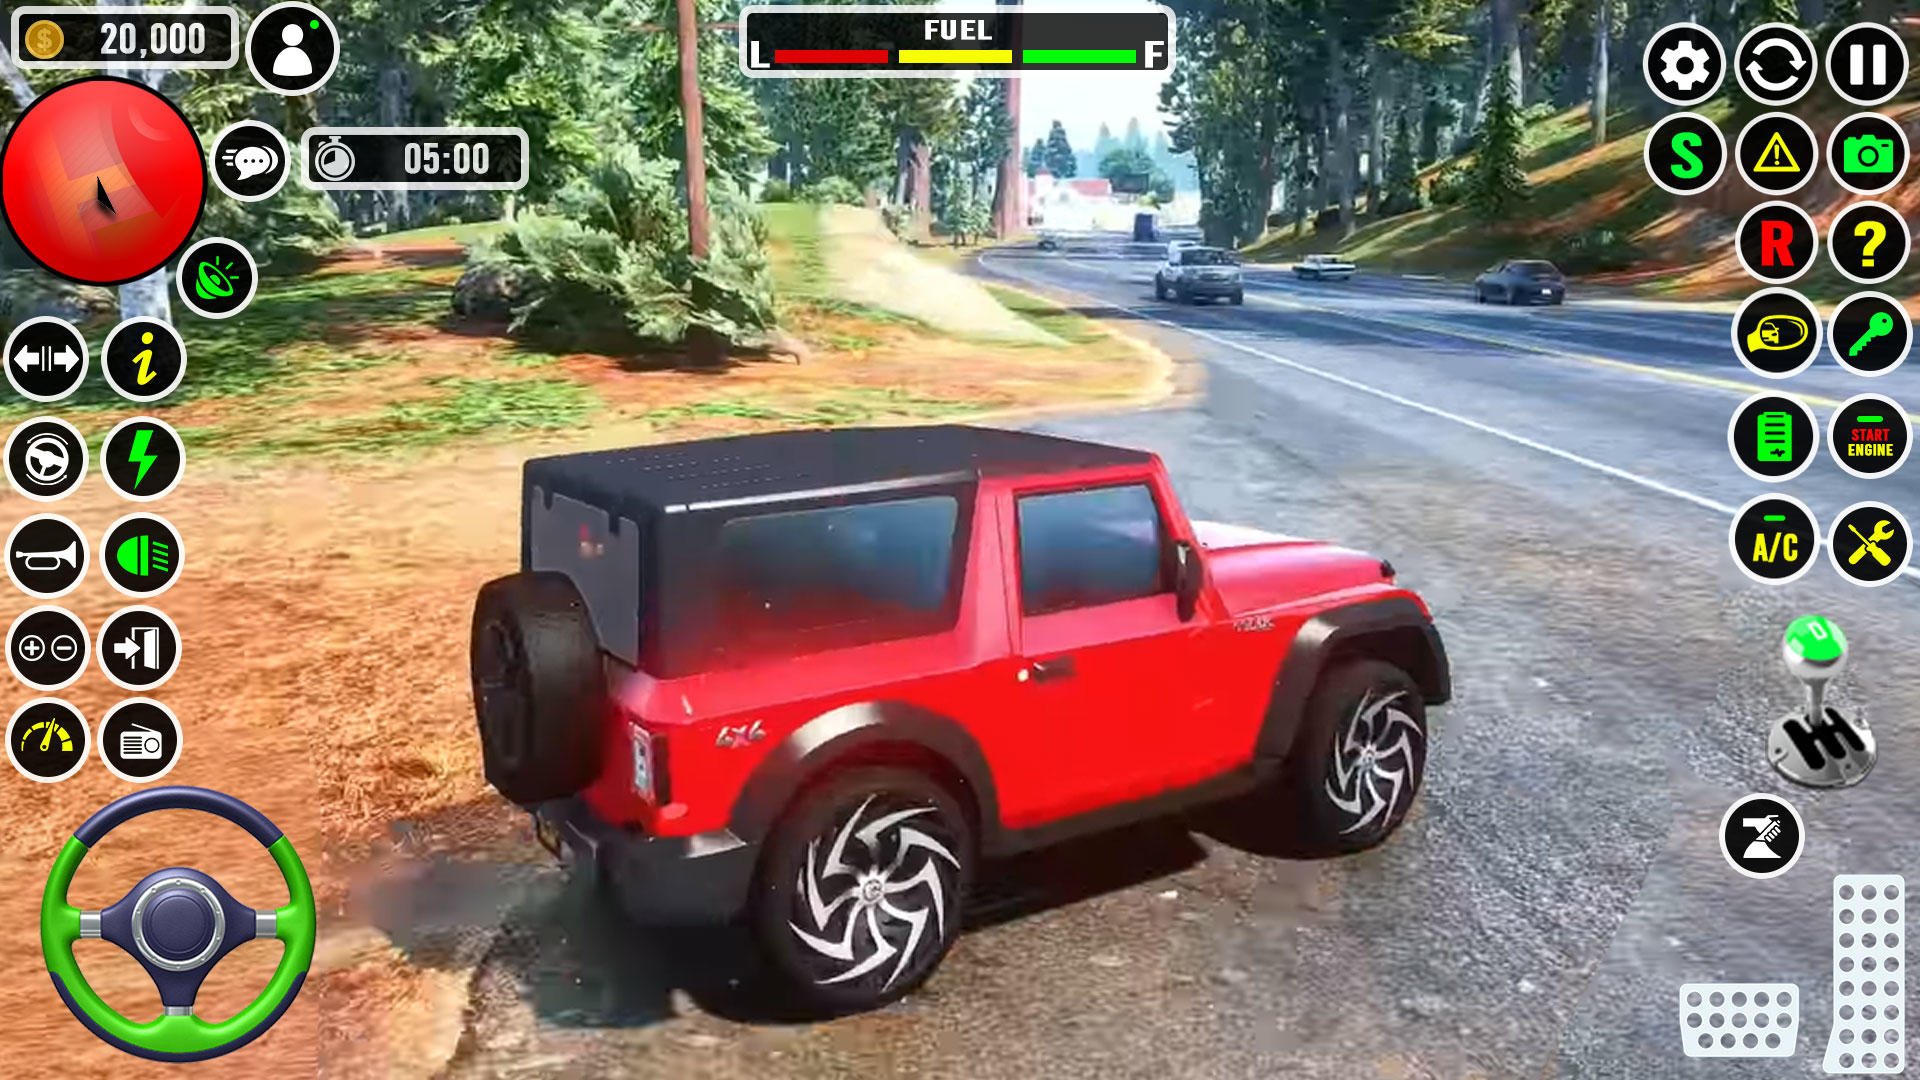 Screenshot 1 of SUV Jeep Driving : Jeep Game 0.1